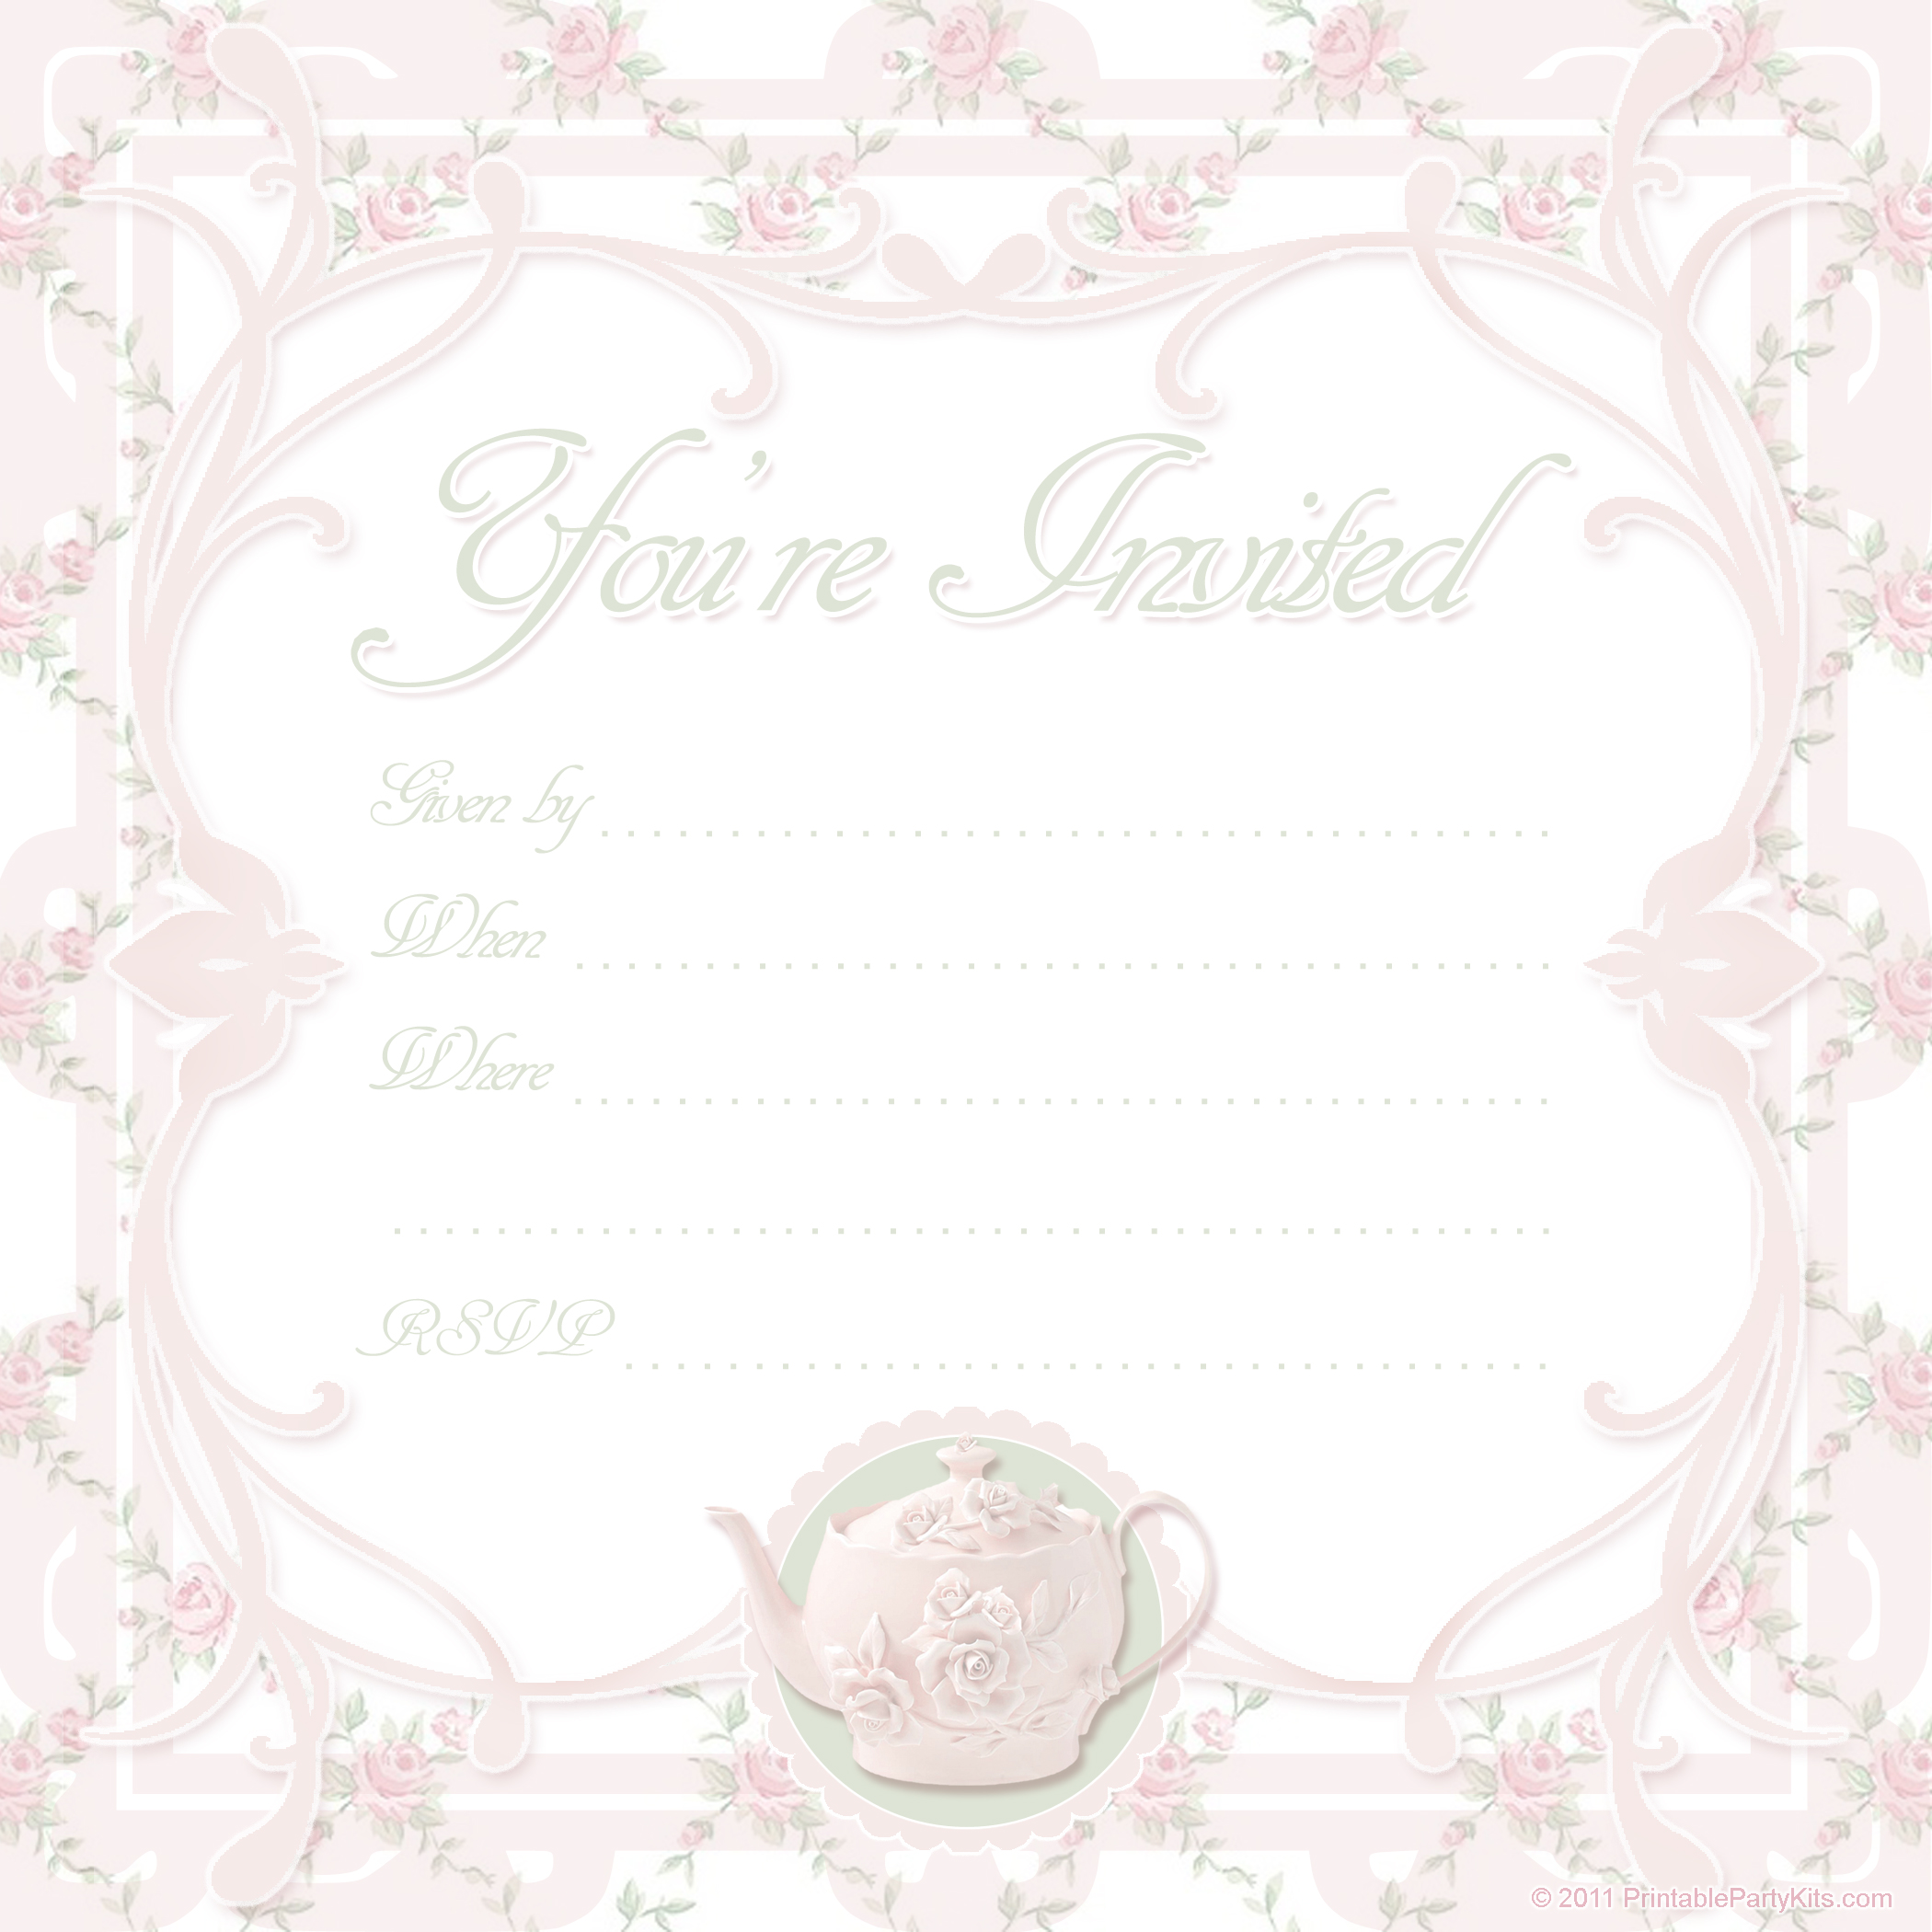 Click On The Free Printable Tea Party Invite Template Below To Enlarge